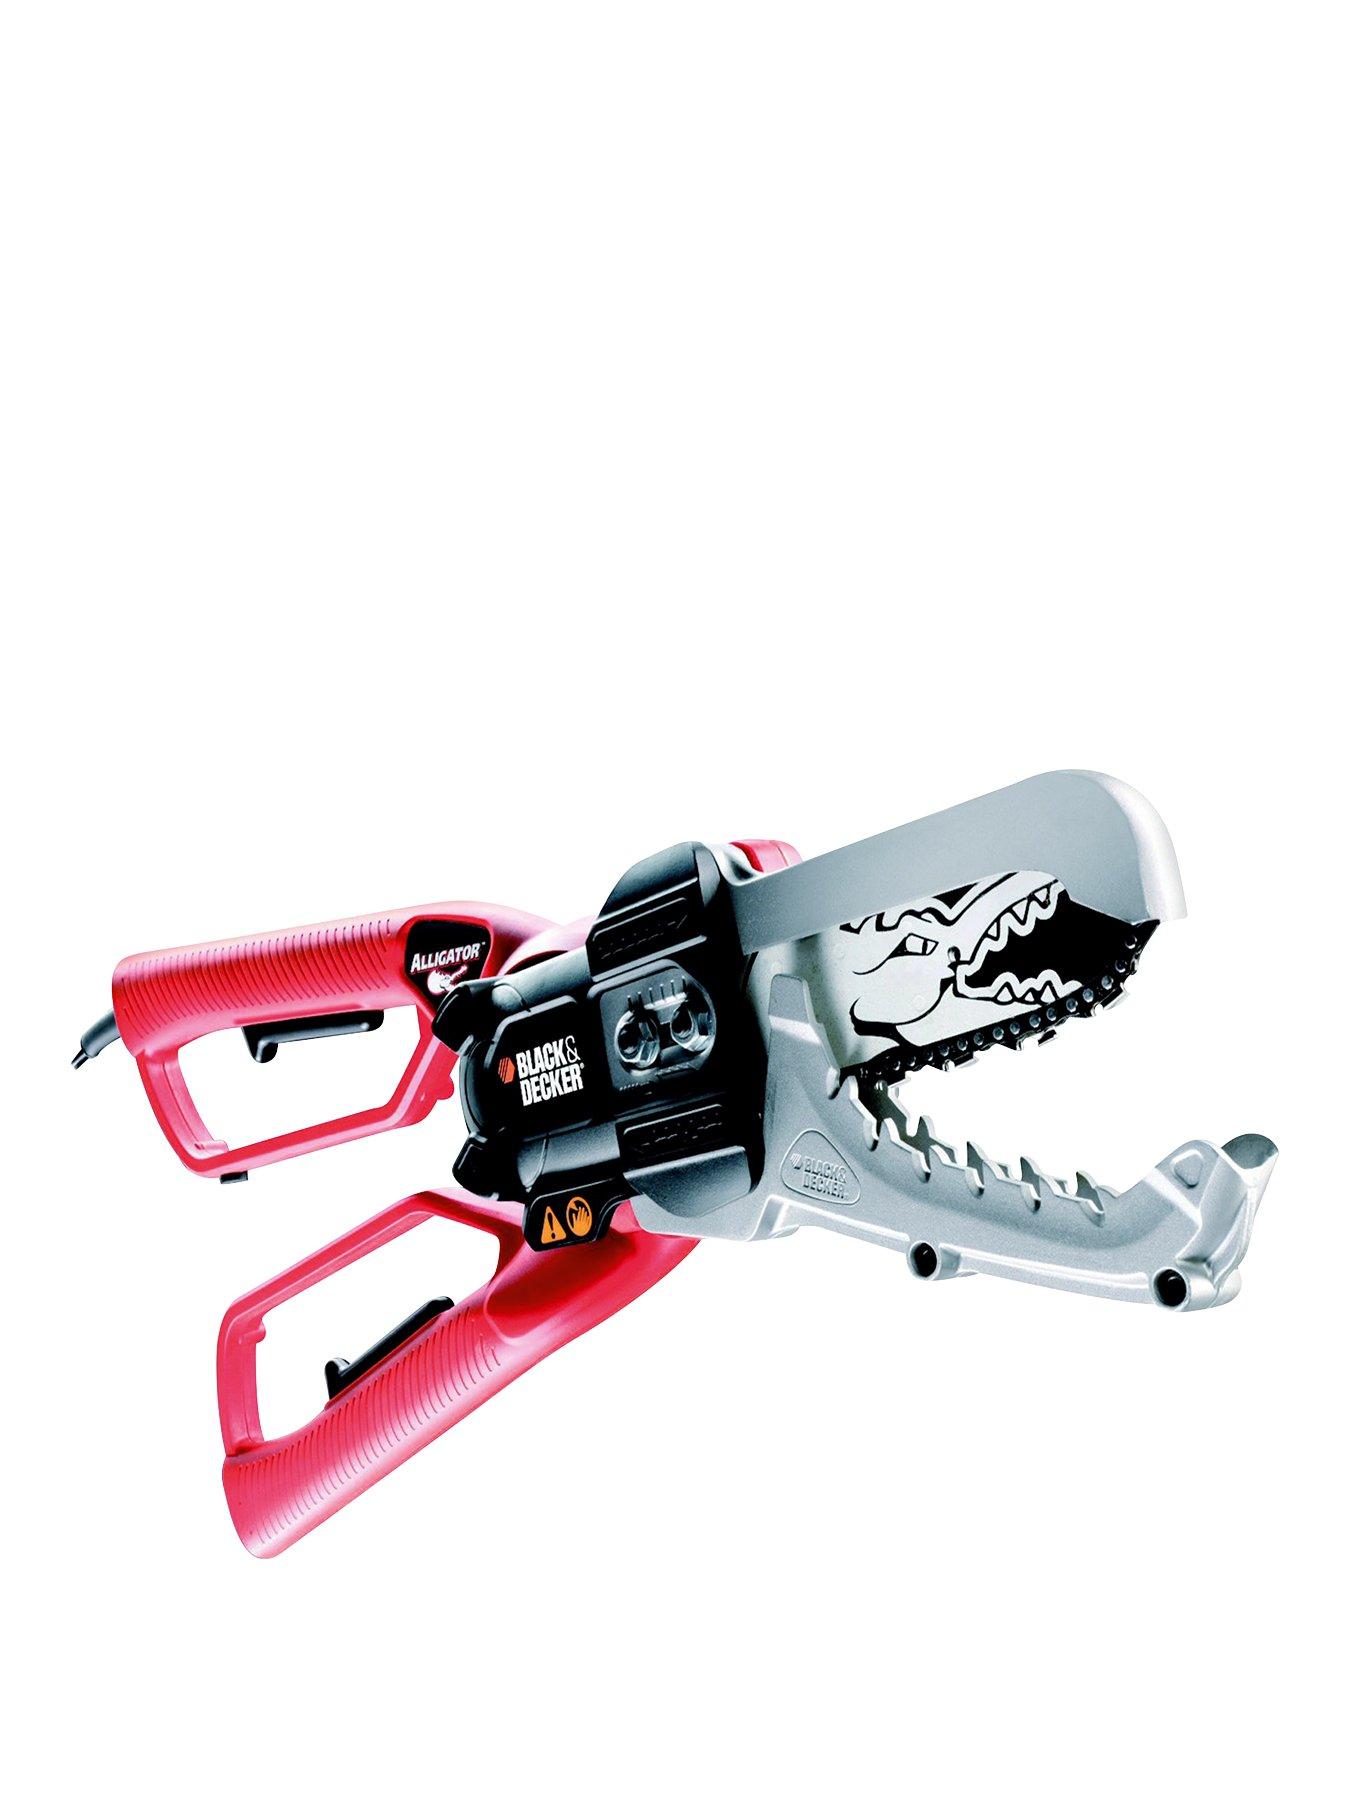 Black & Decker Alligator (Trimmer/Chain Saw) - Product Review